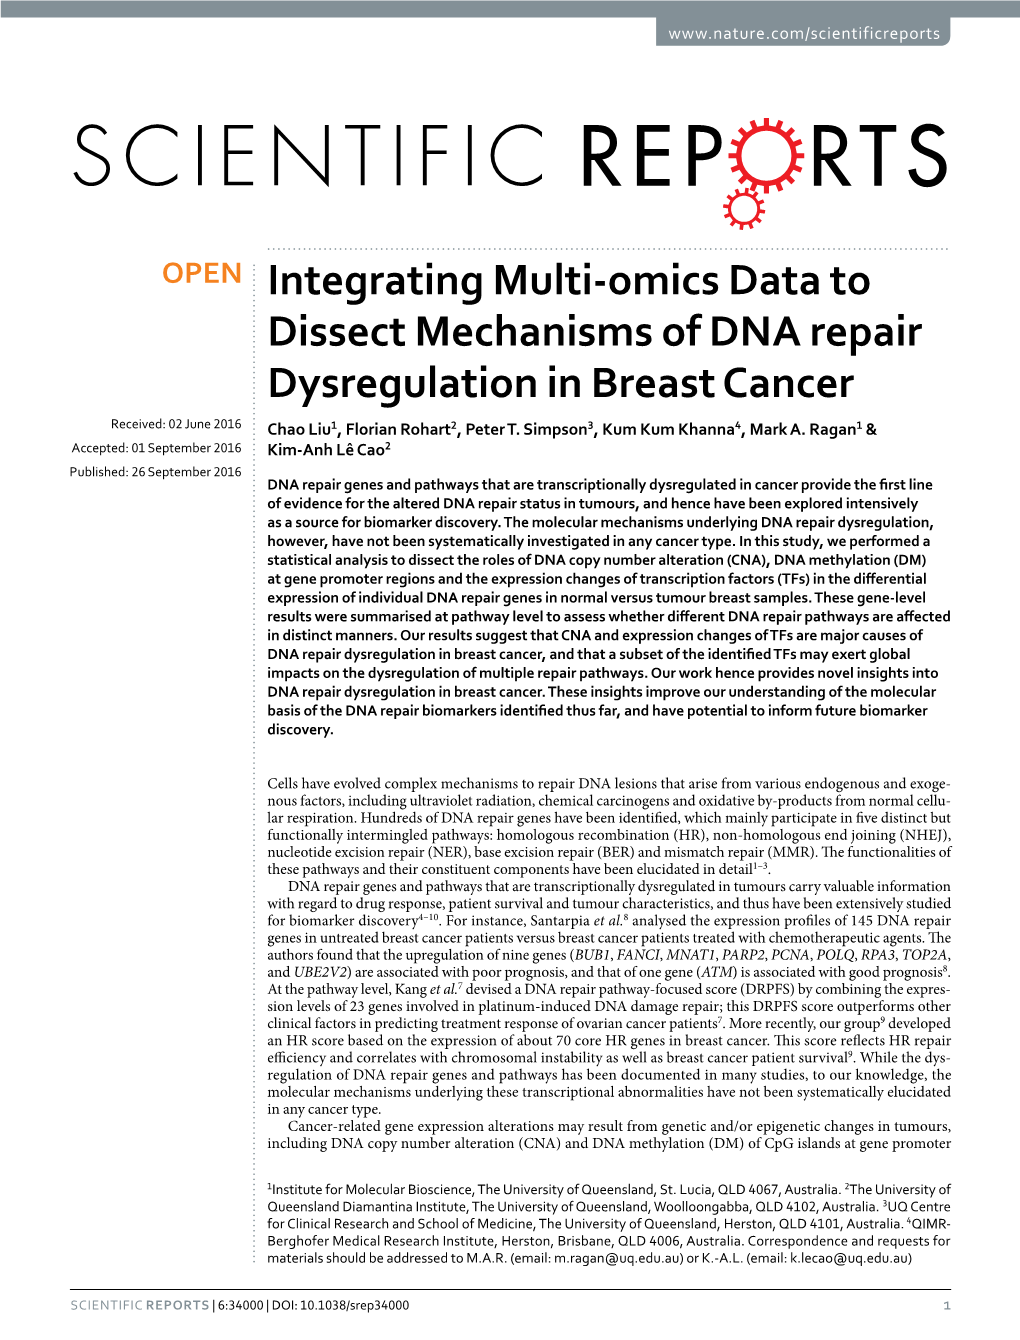 Integrating Multi-Omics Data to Dissect Mechanisms of DNA Repair Dysregulation in Breast Cancer Received: 02 June 2016 Chao Liu1, Florian Rohart2, Peter T